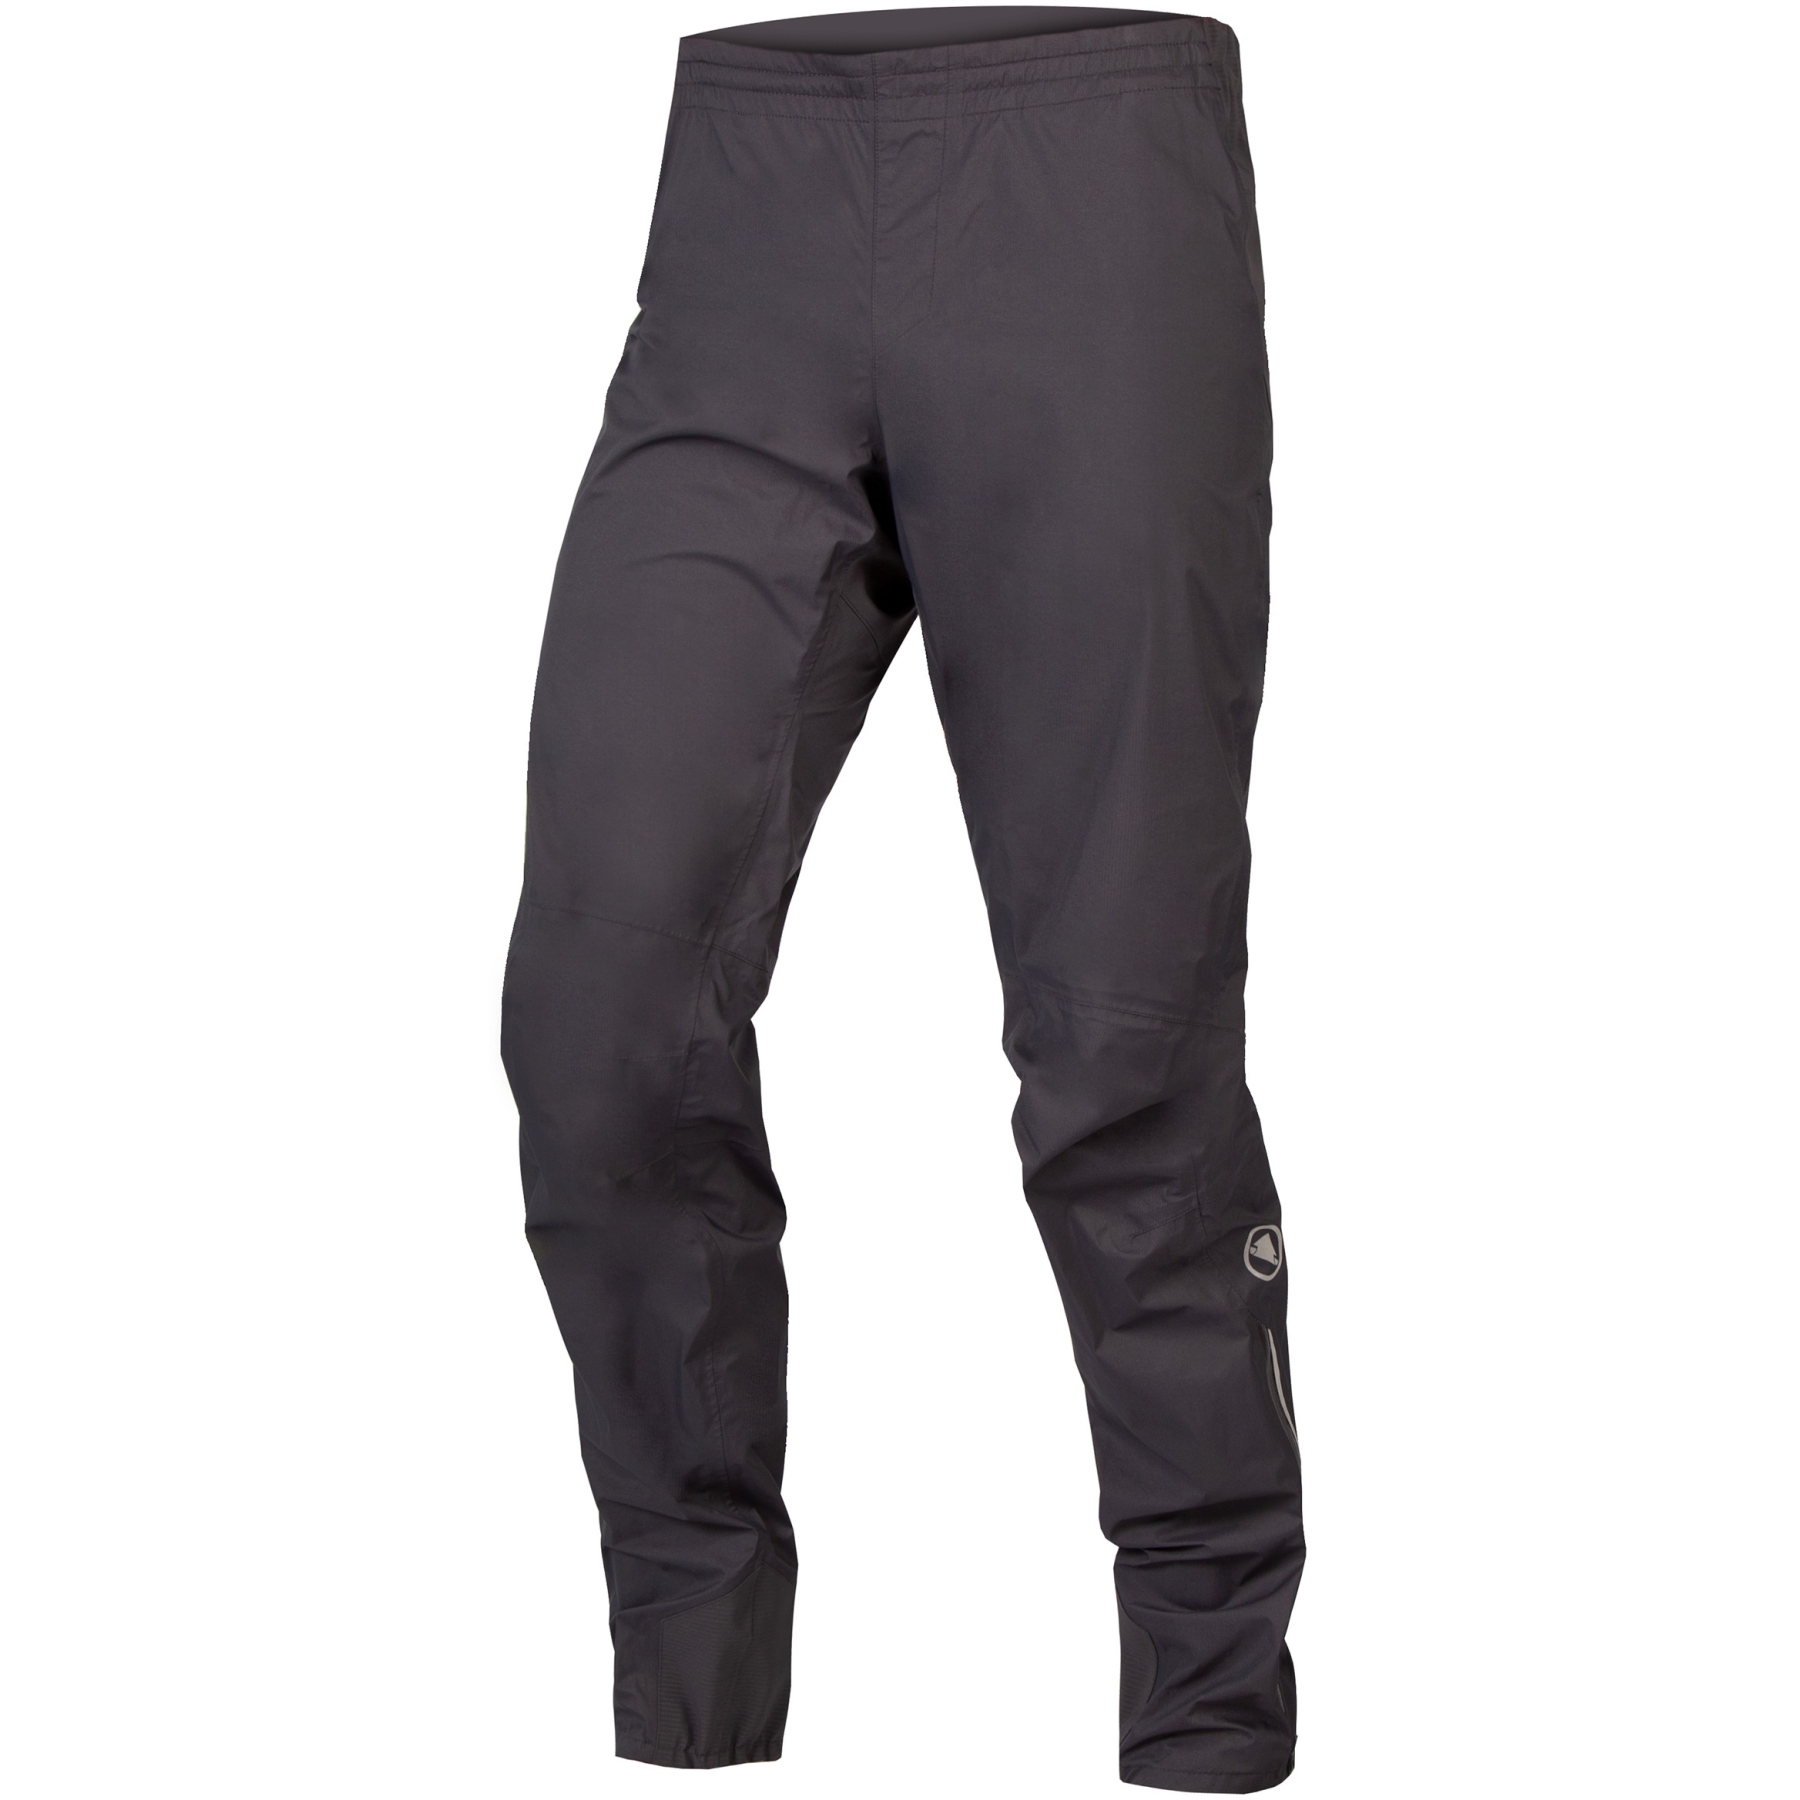 Update more than 86 waterproof cycling trousers super hot - in.duhocakina